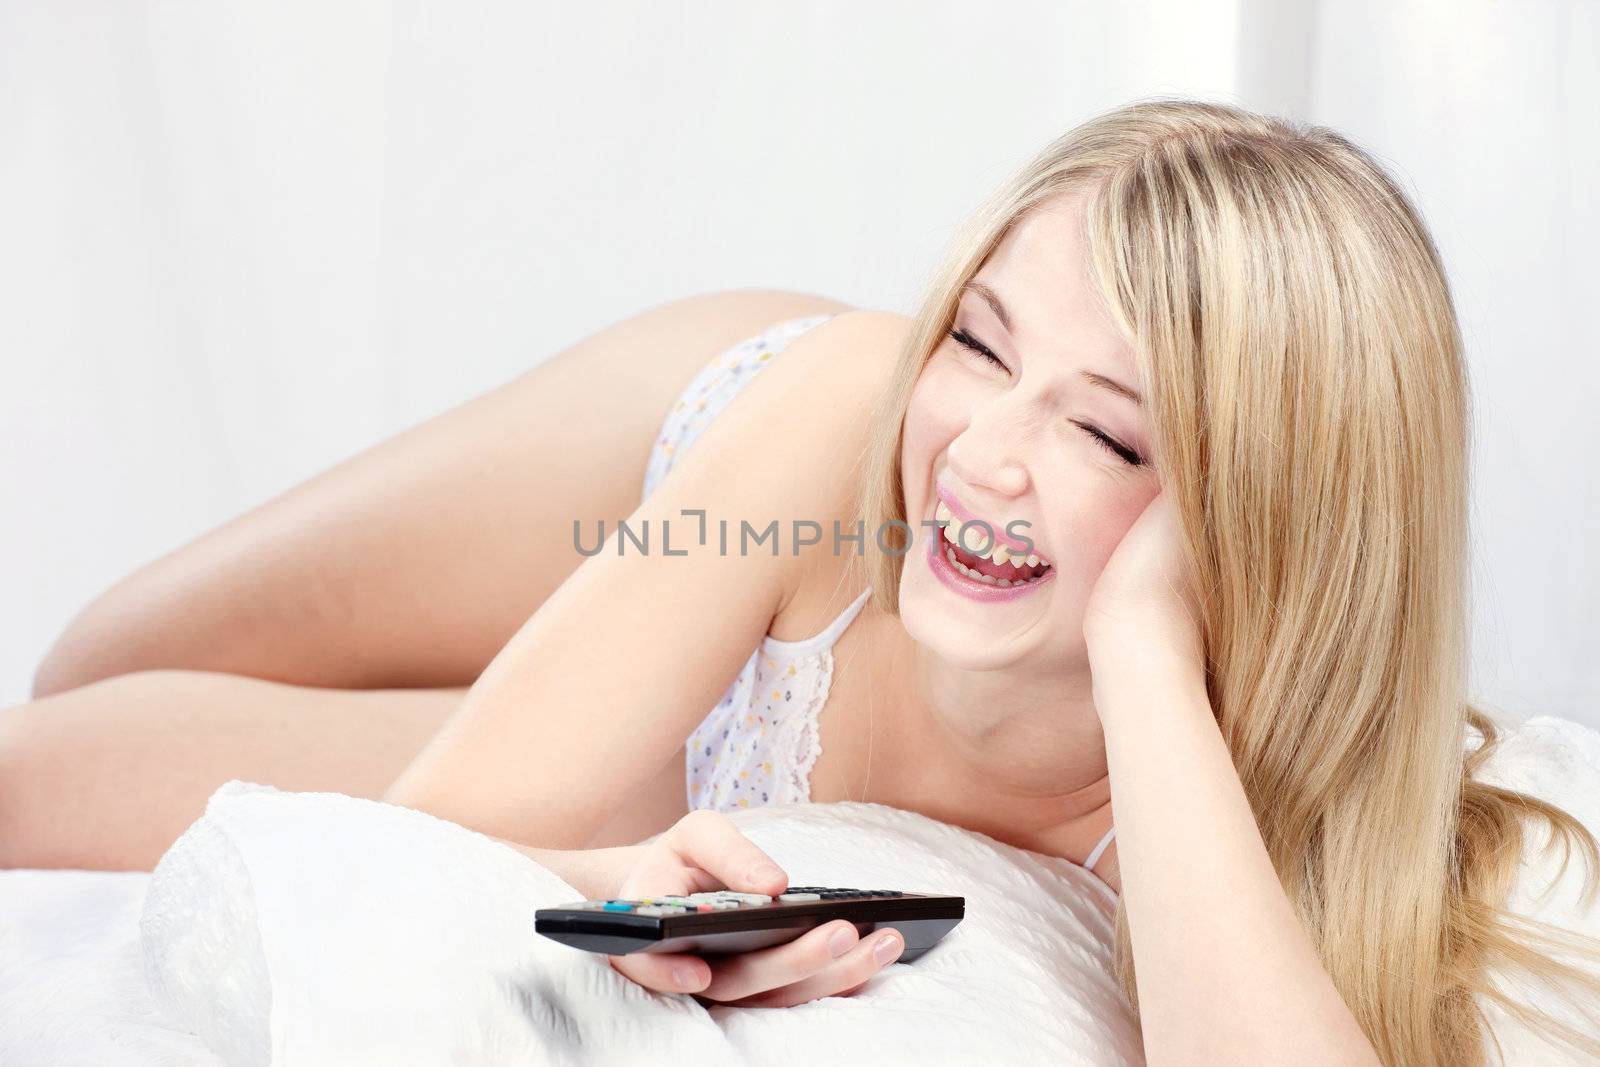 Woman laughing in bed and holding remote controller